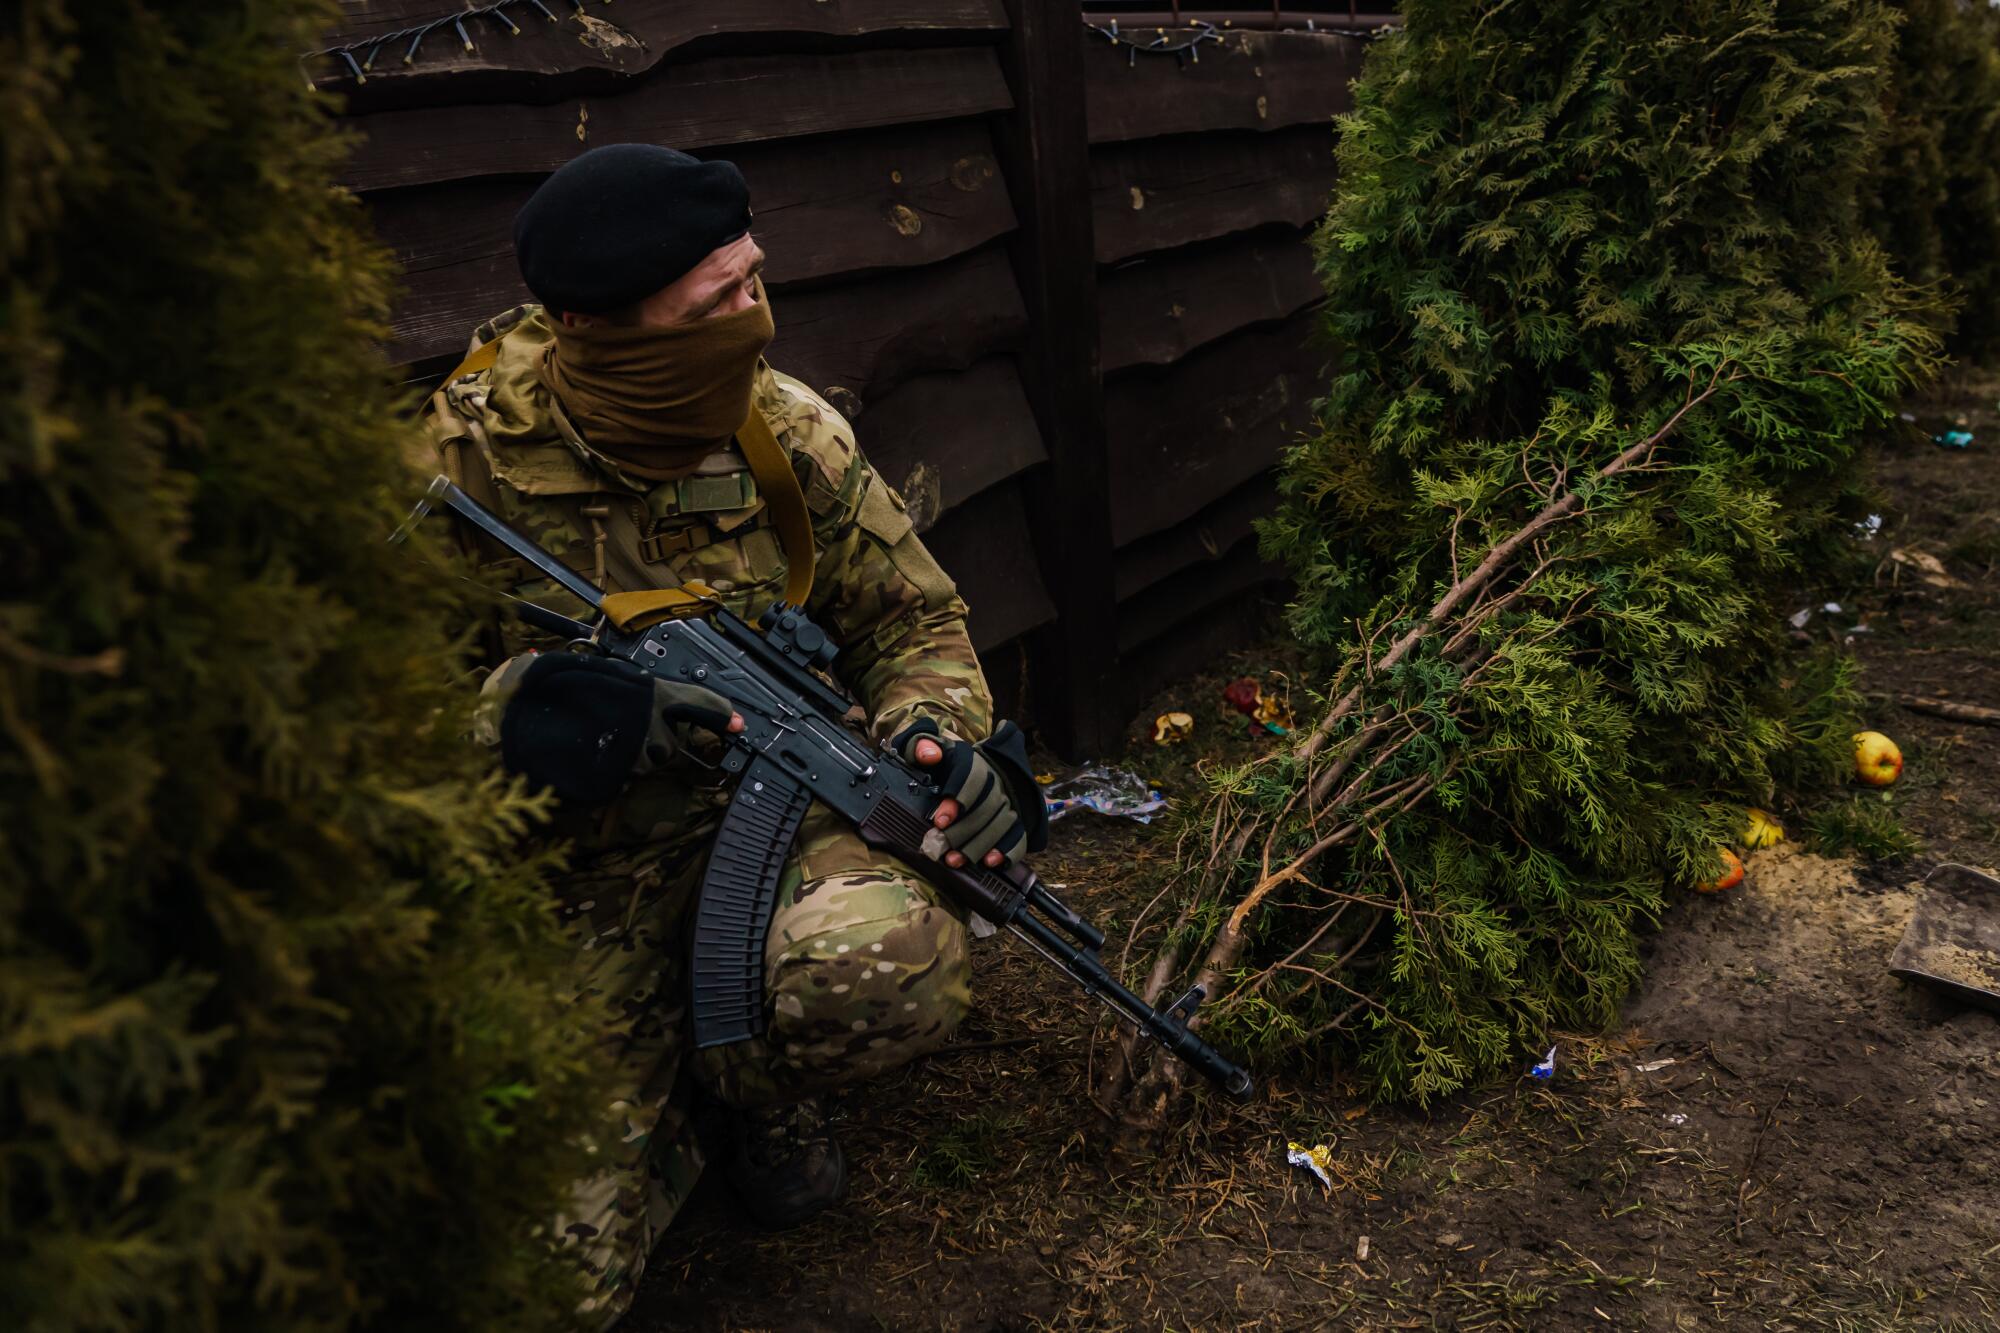 Michael Pestovsky takes cover from incoming Russian artillery fire in Irpin, Ukraine